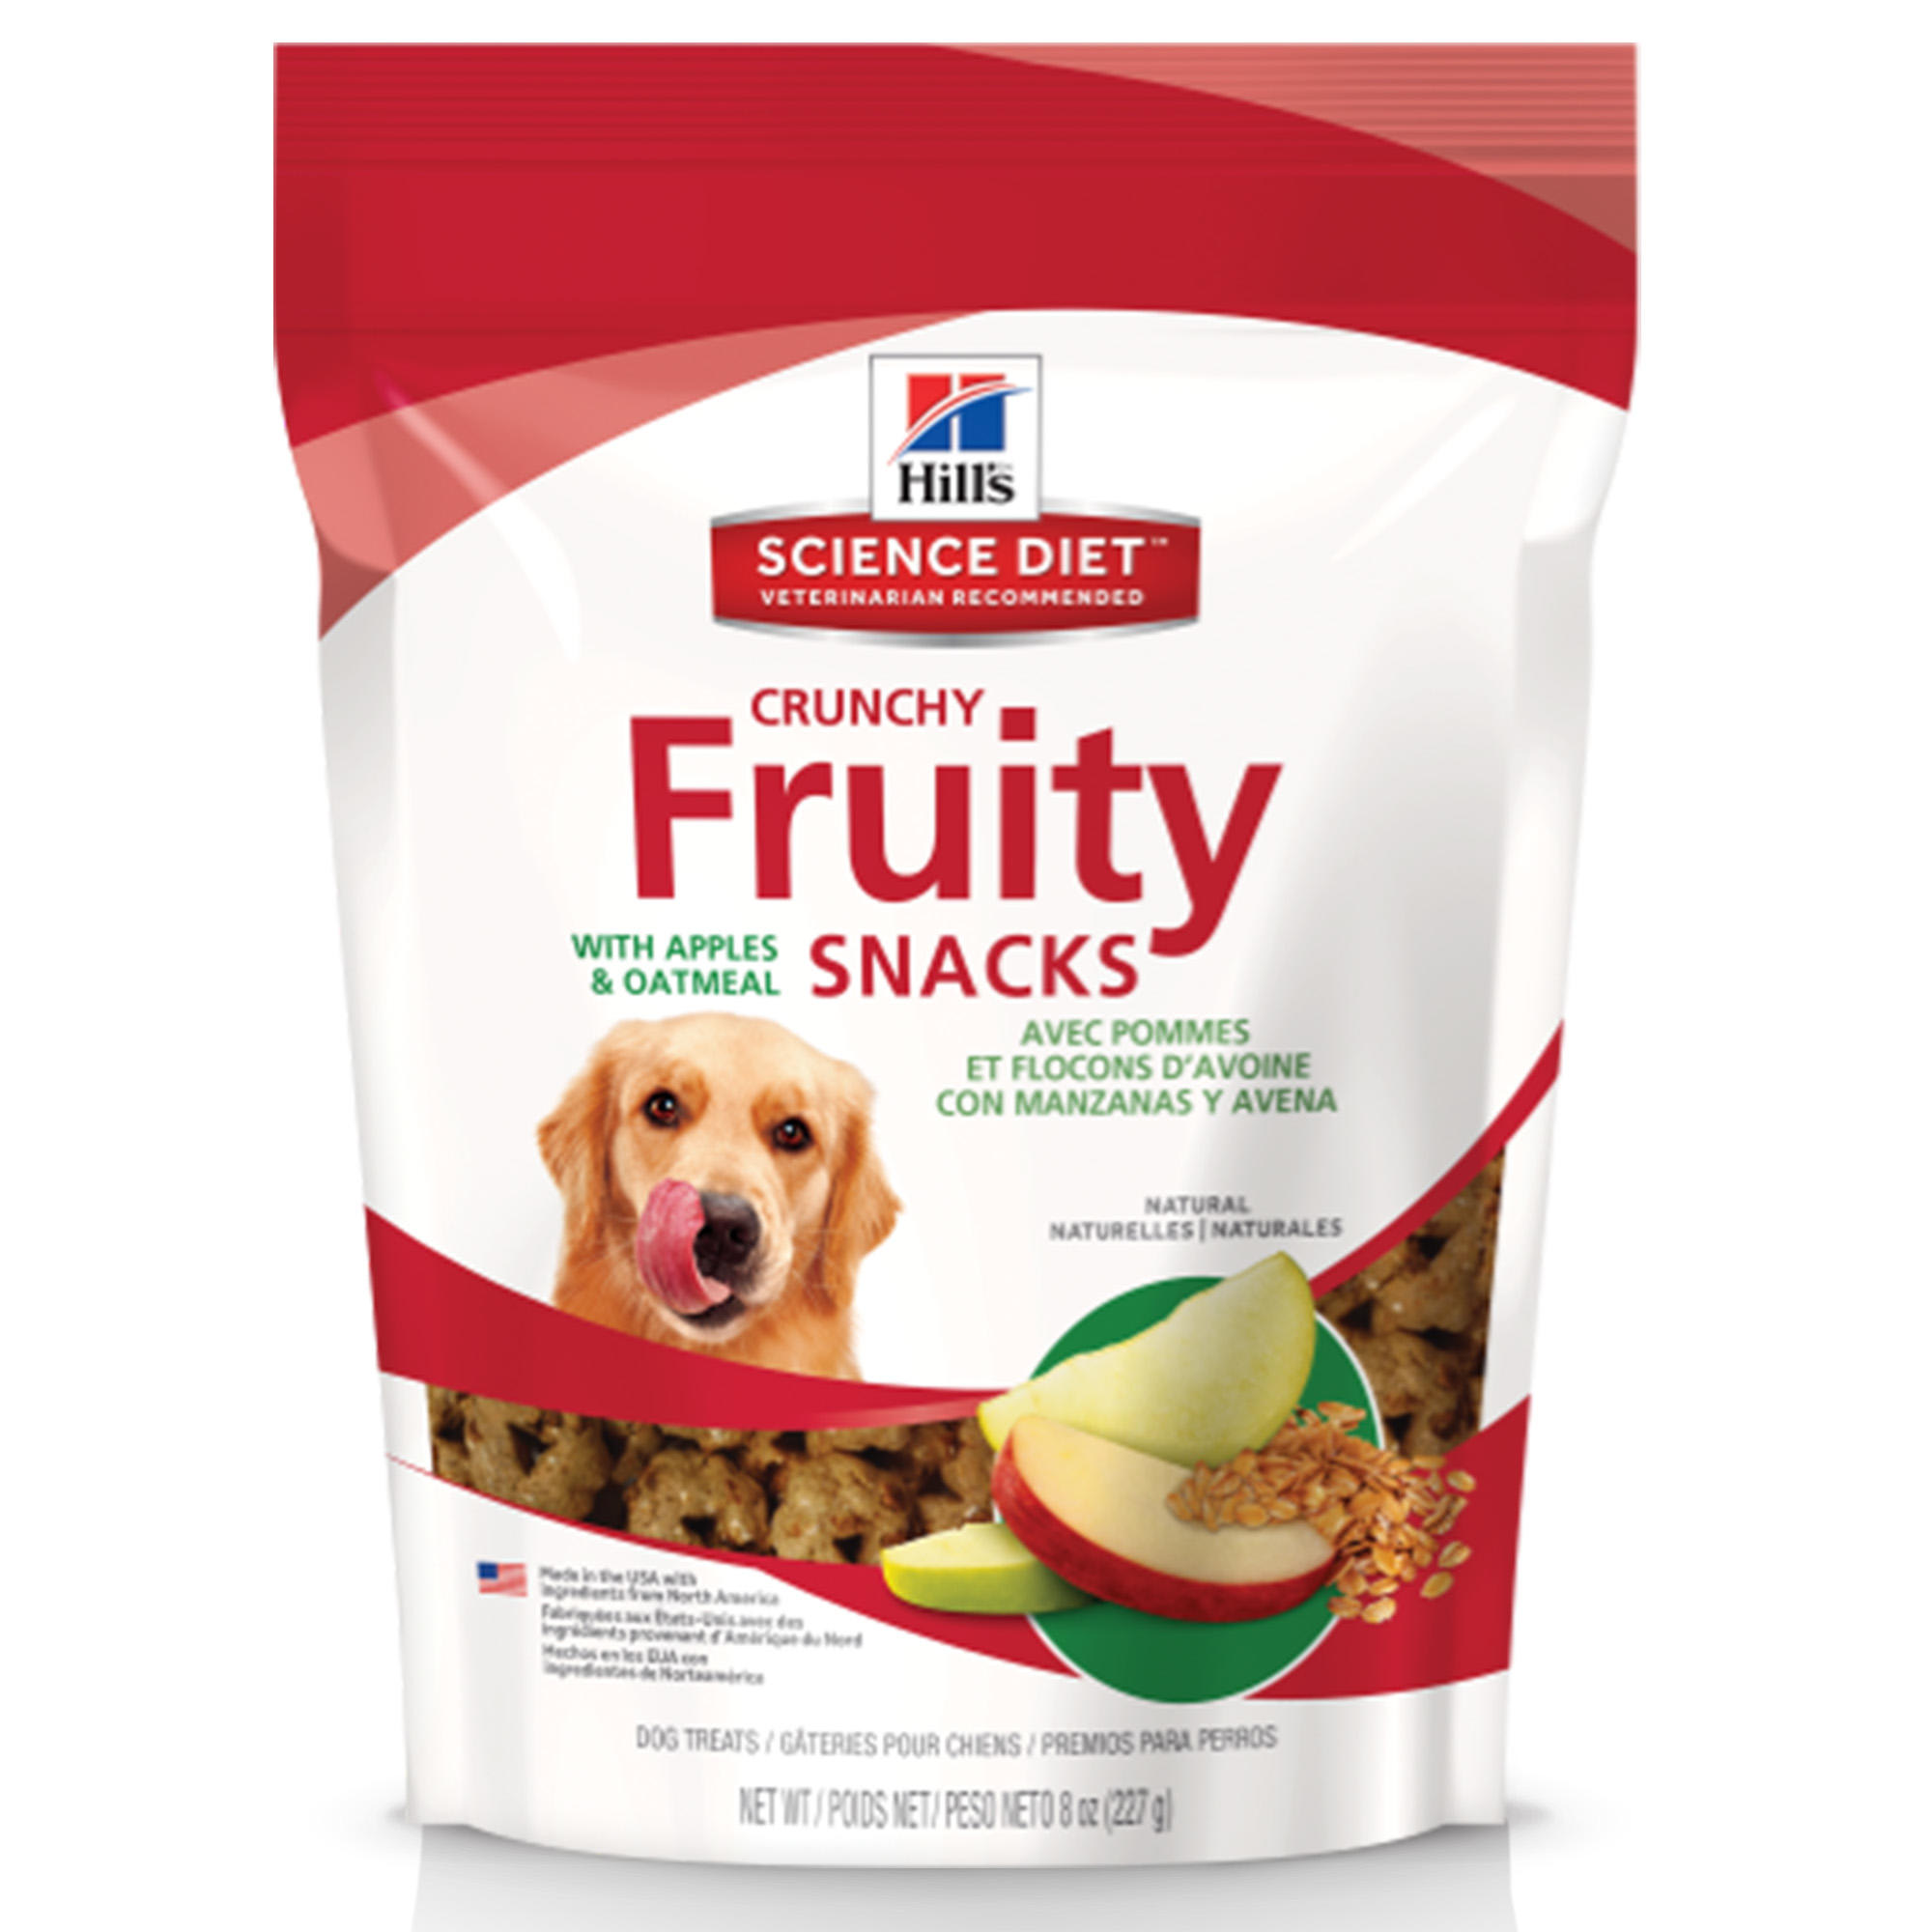 Photos - Dog Food Hills Hill's Hill's Natural Fruity Snacks with Apples & Oatmeal, Crunchy Dog Tre 